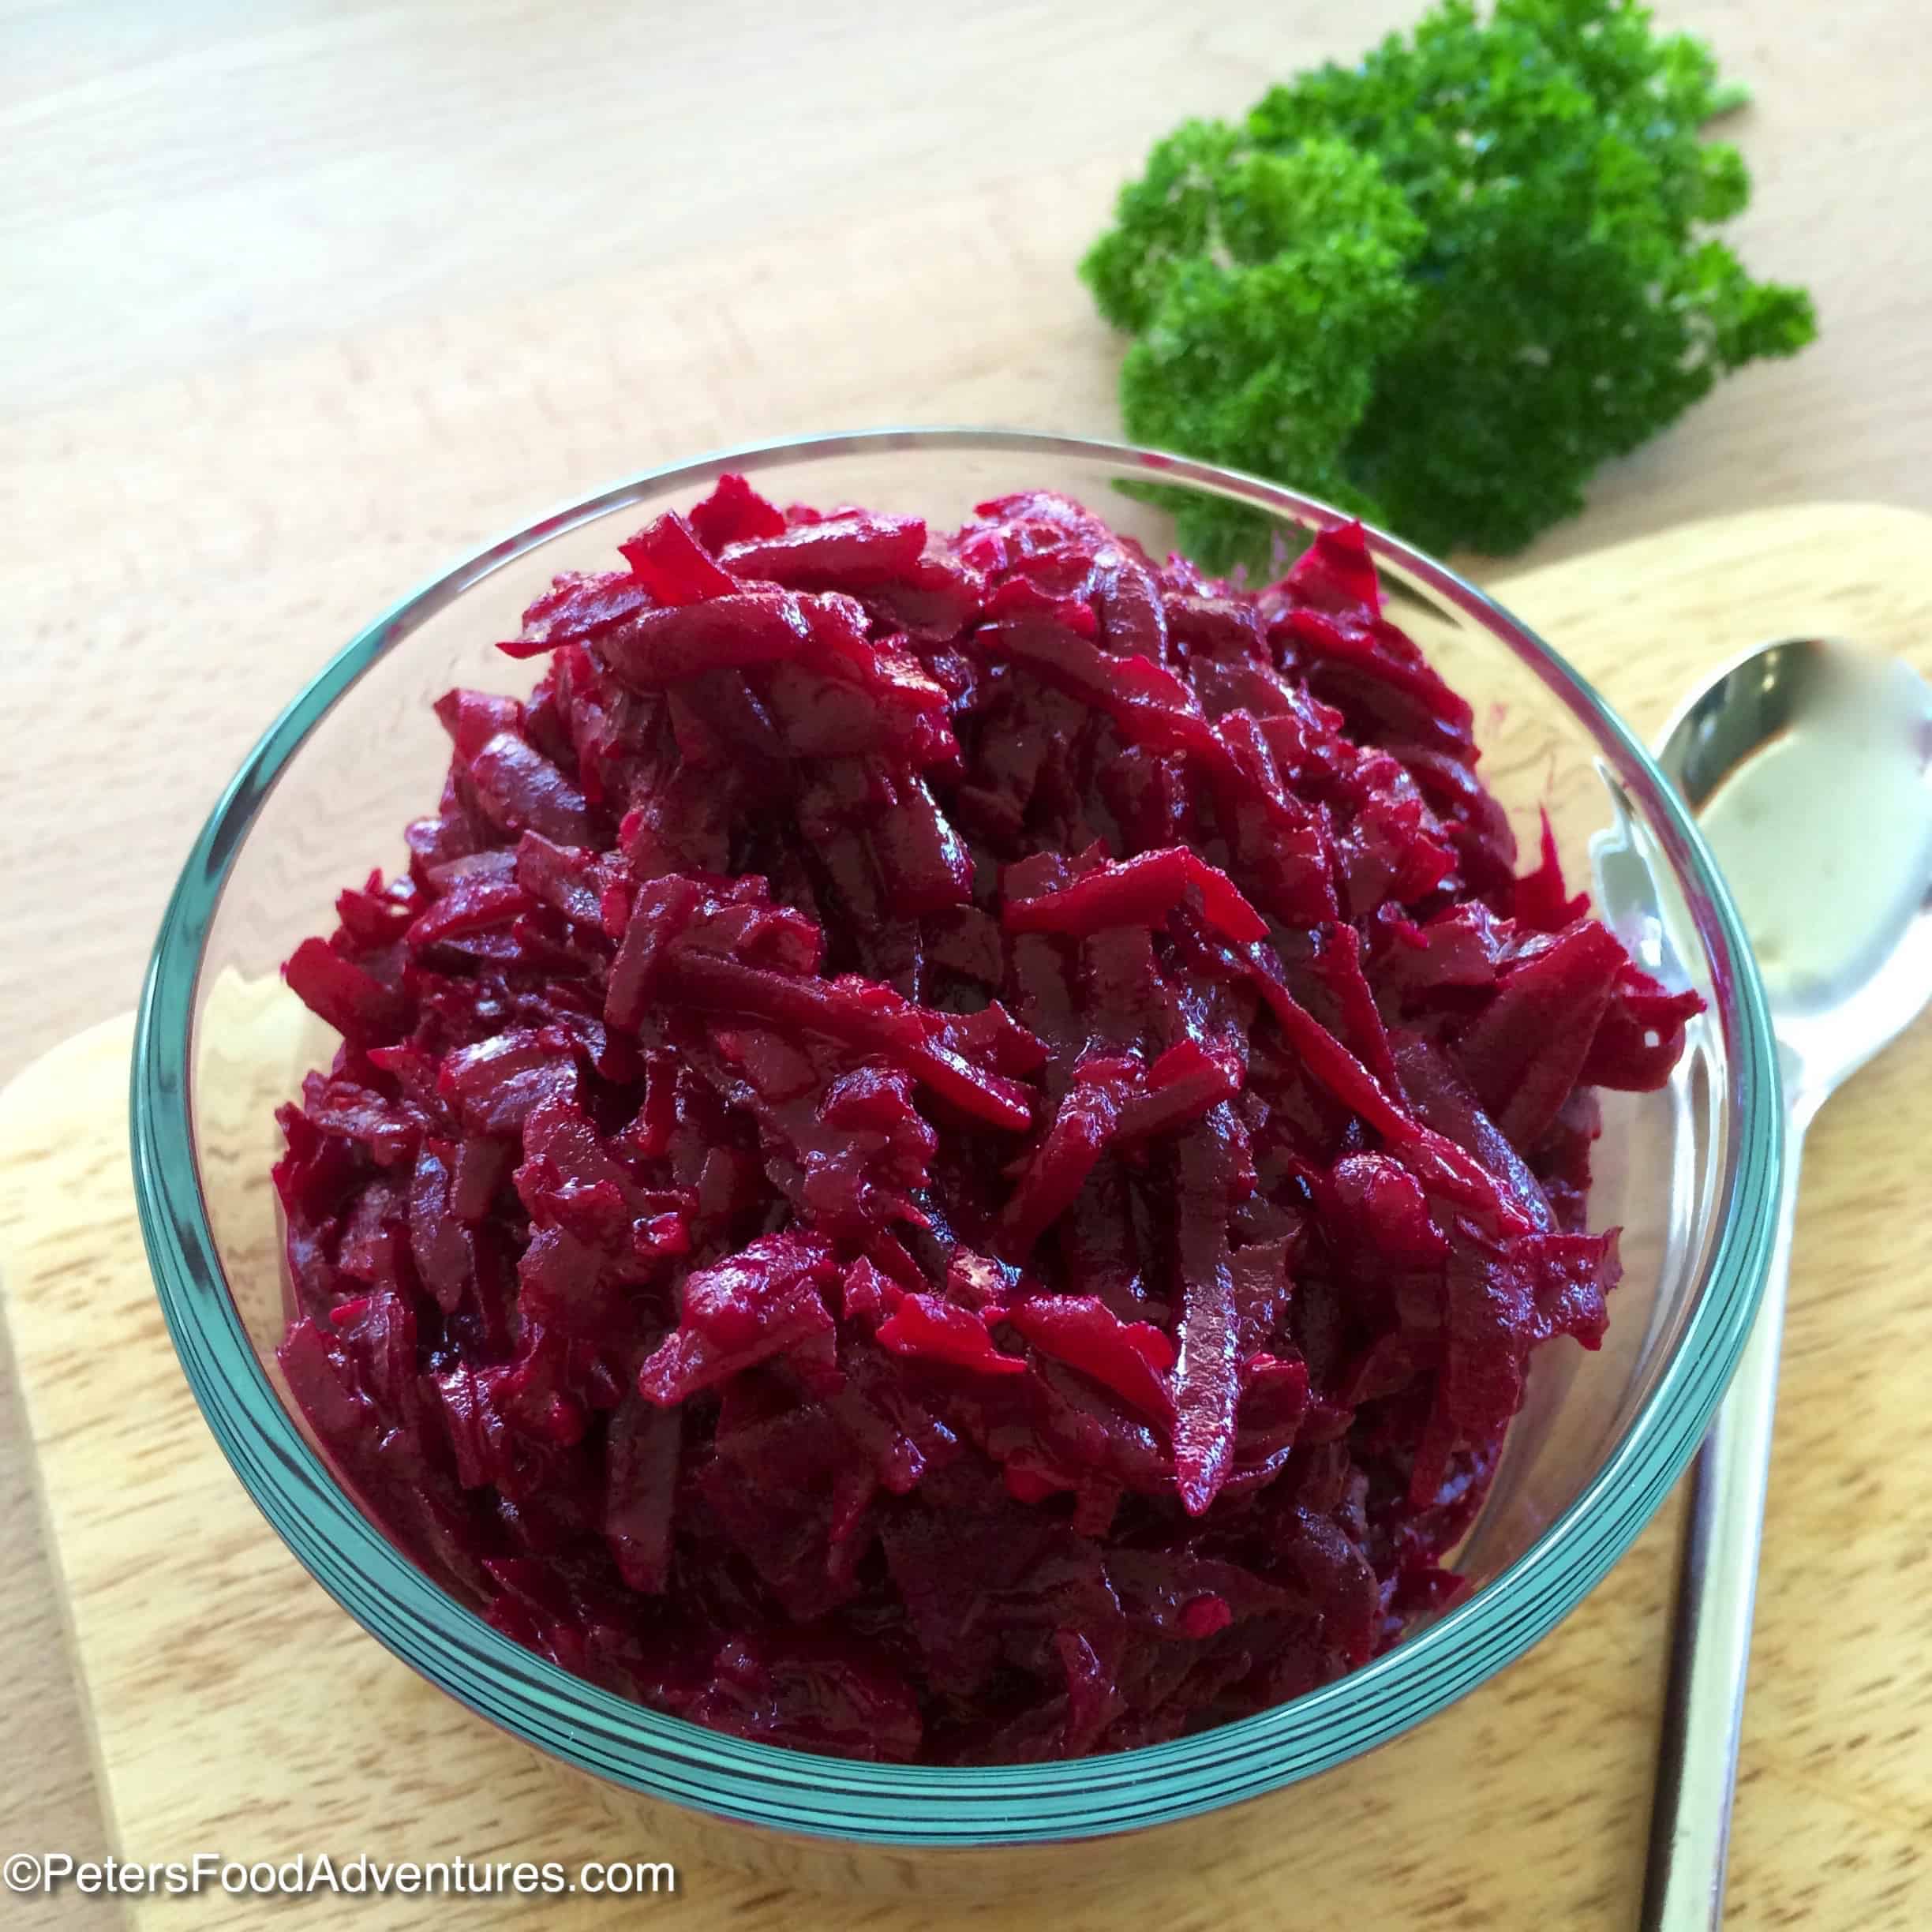 A tasty Russian condiment with a wasabi-like kick. How to make Hren Horseradish and Beets (Хрен со свеклой). Perfect with steak or smoked meats!